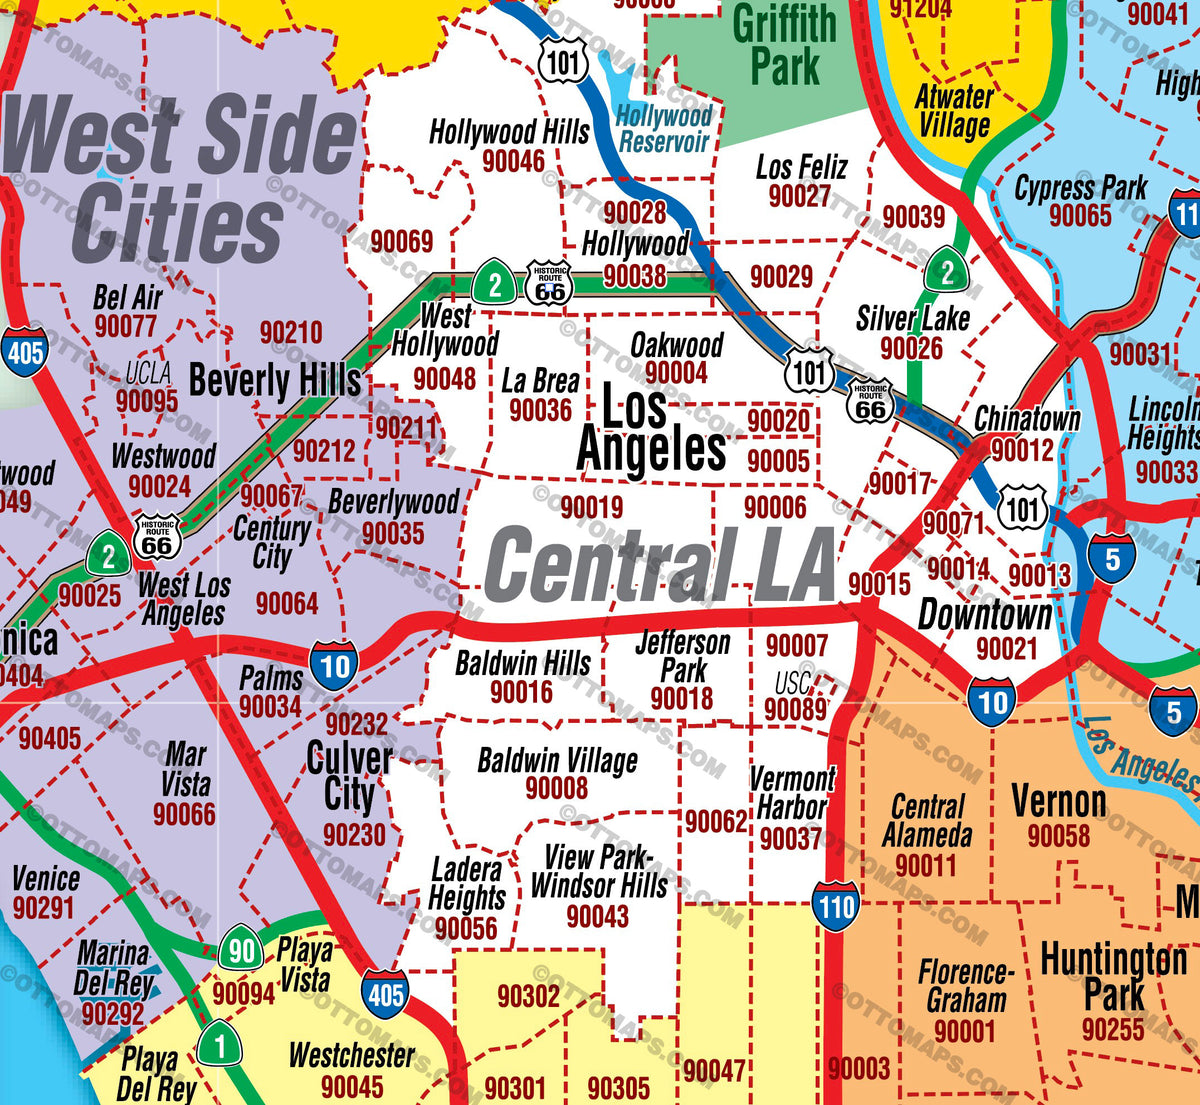 los angeles zip code map google Los Angeles Zip Code Map Full County Areas Colorized Otto Maps los angeles zip code map google